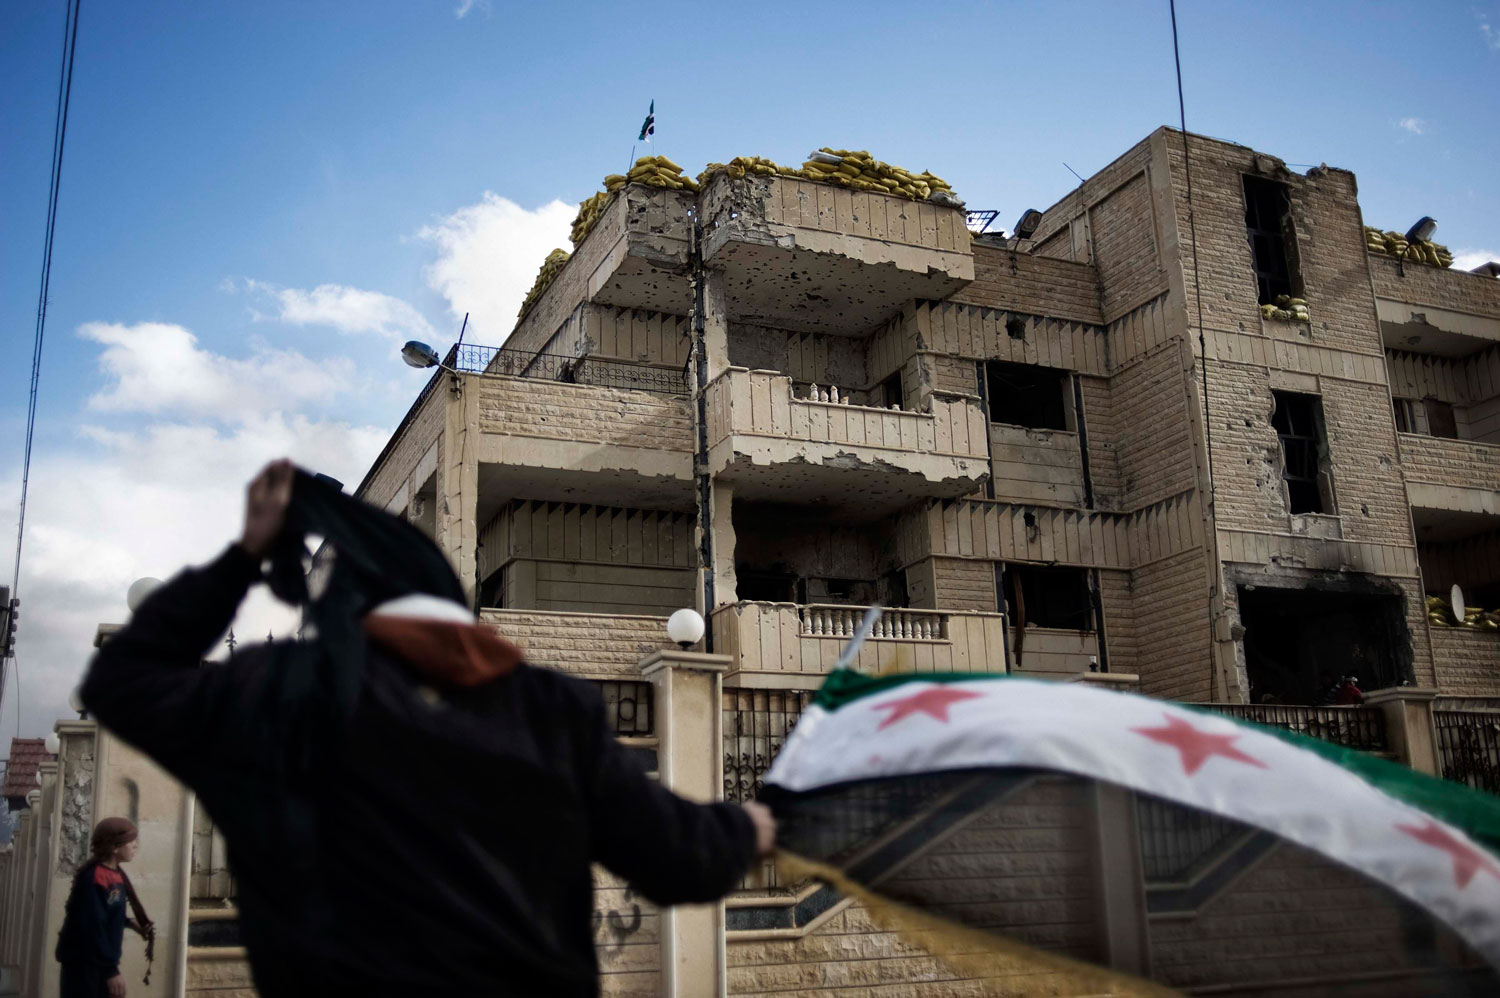 Feb. 10, 2012. A man waves the old Syrian flag in front of the former police station in al-Qsair.